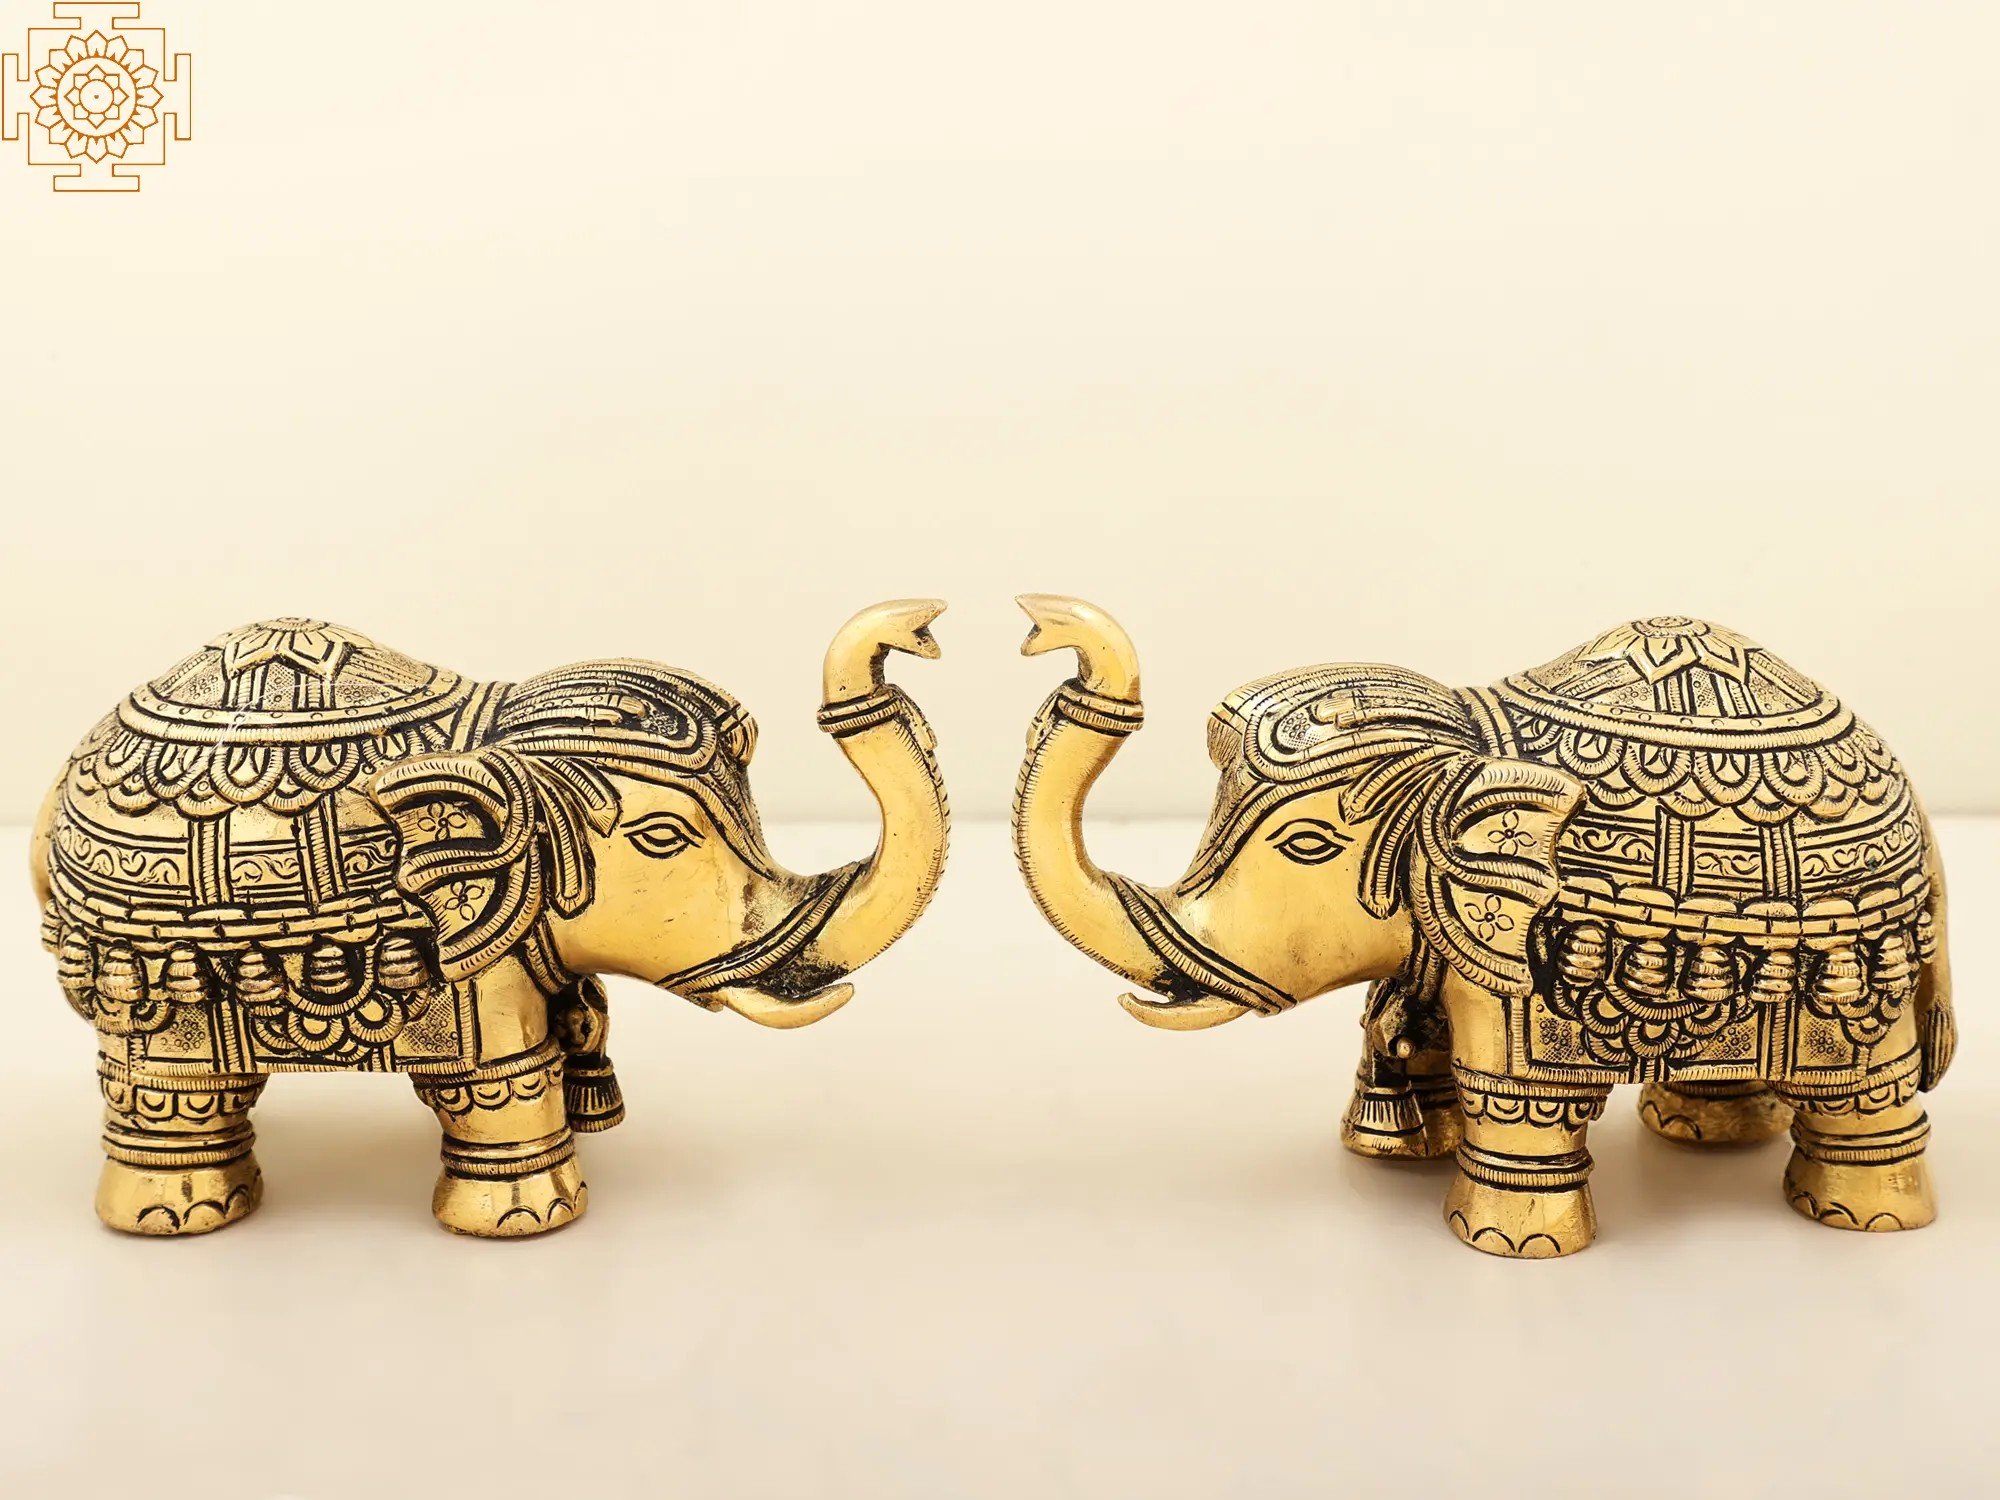 Details about   GOLD Ceramic 6" standing sculpture lucky RAISED TRUNK elephant figurine statue 